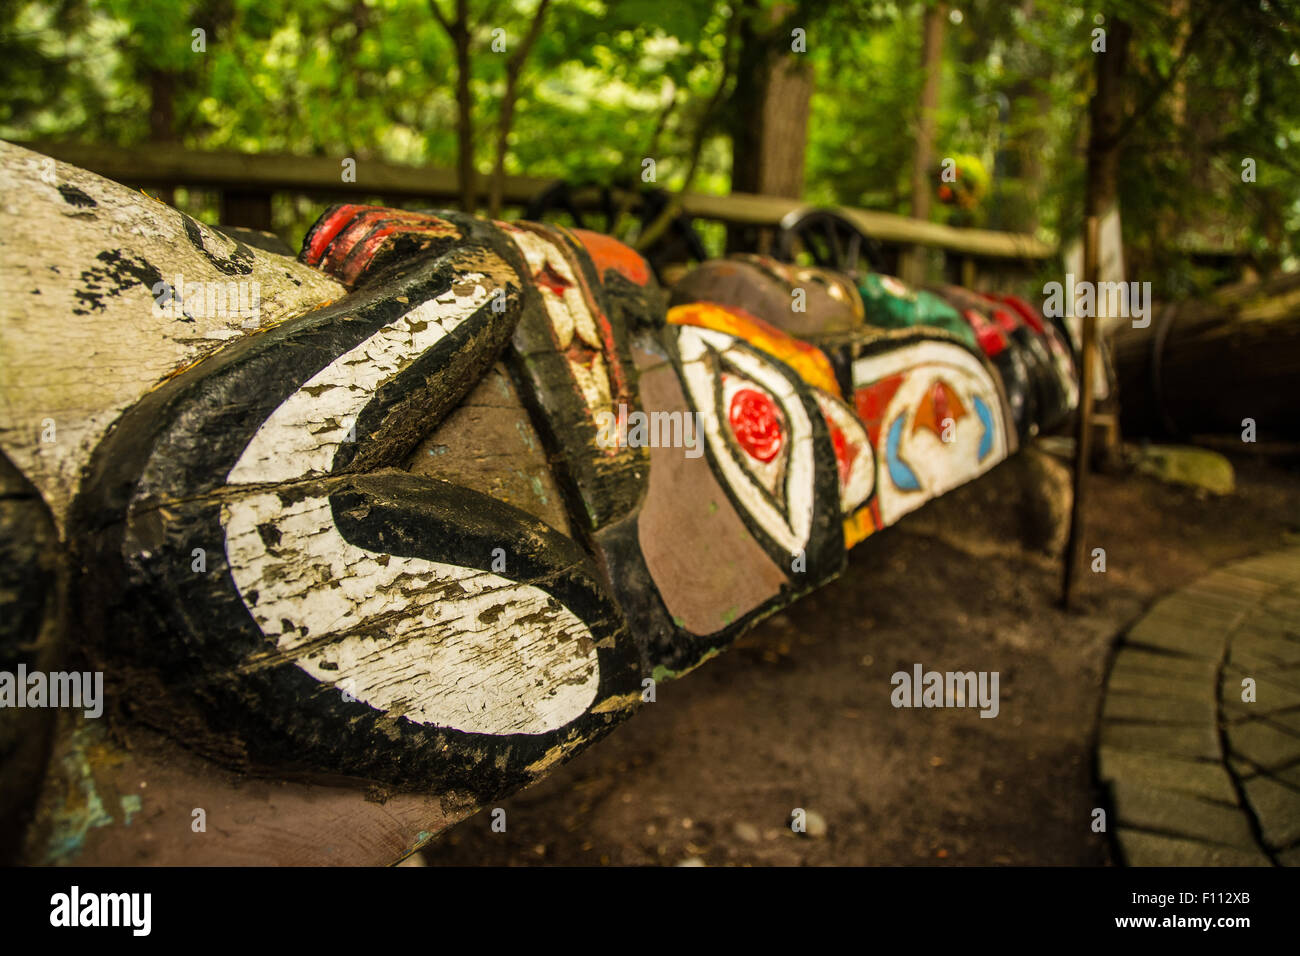 This is a fallen totem pole, a legacy of the first nations which is now at the Capilano bridge park in Vancouver, Canada. Stock Photo